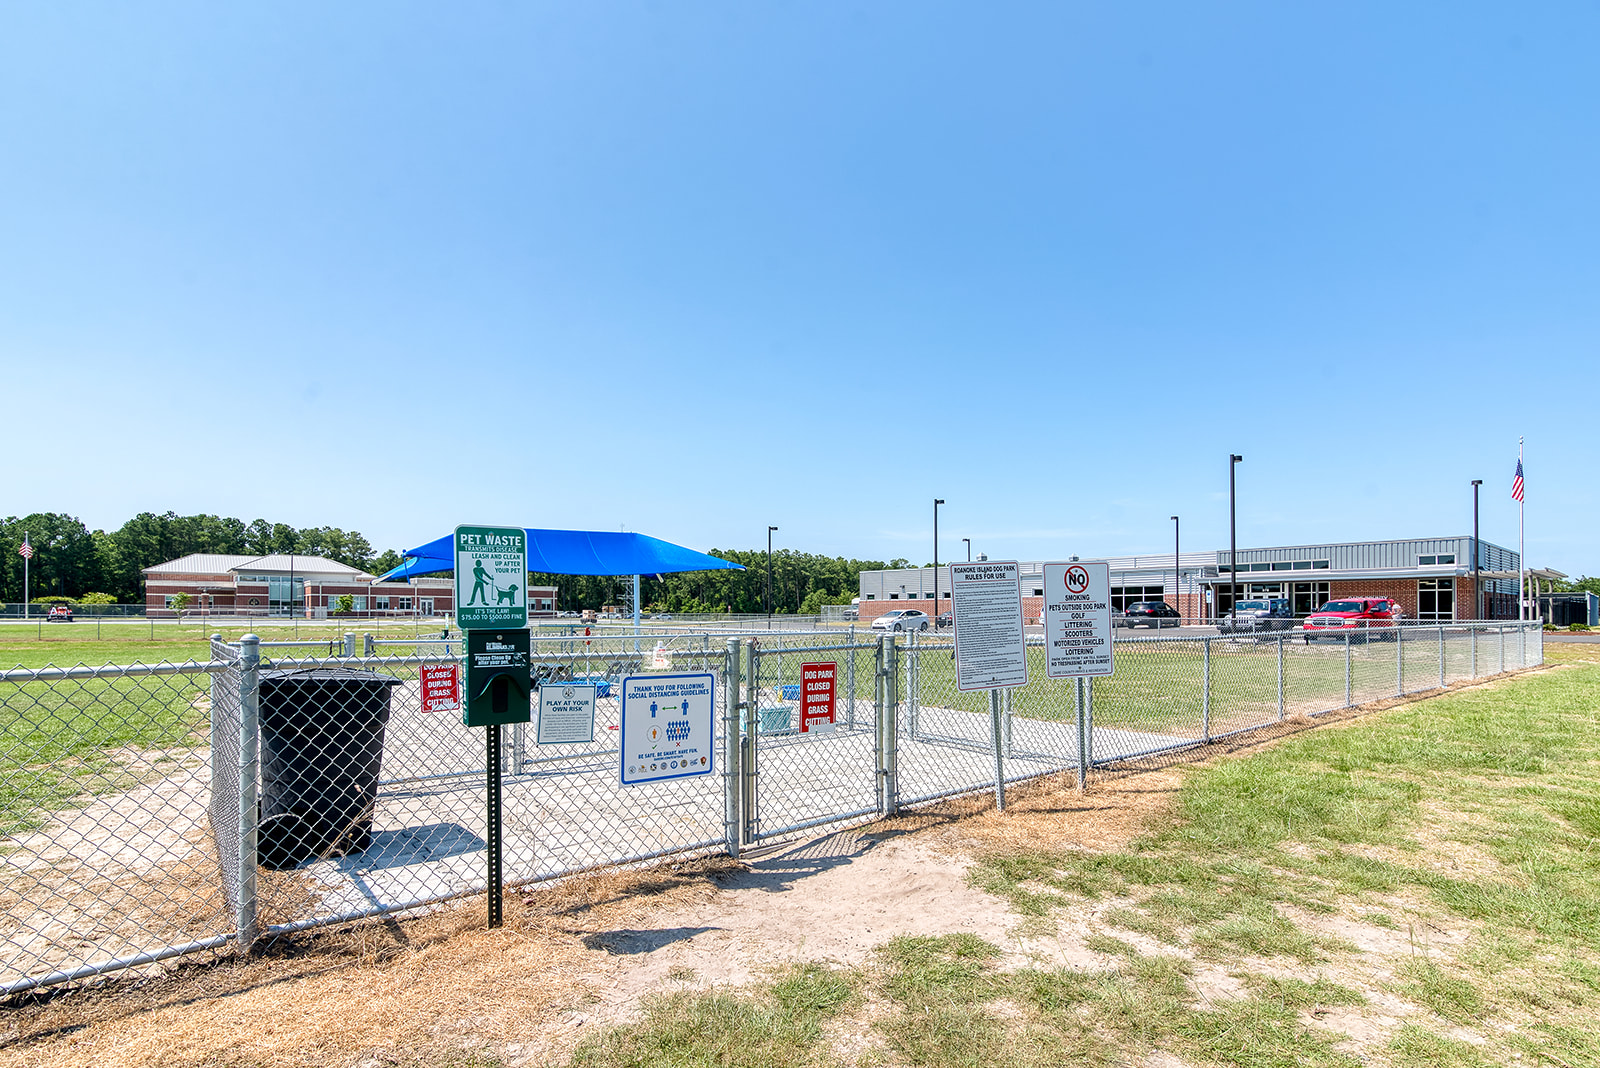 Image of the fenced entrance to the manteo dog park.